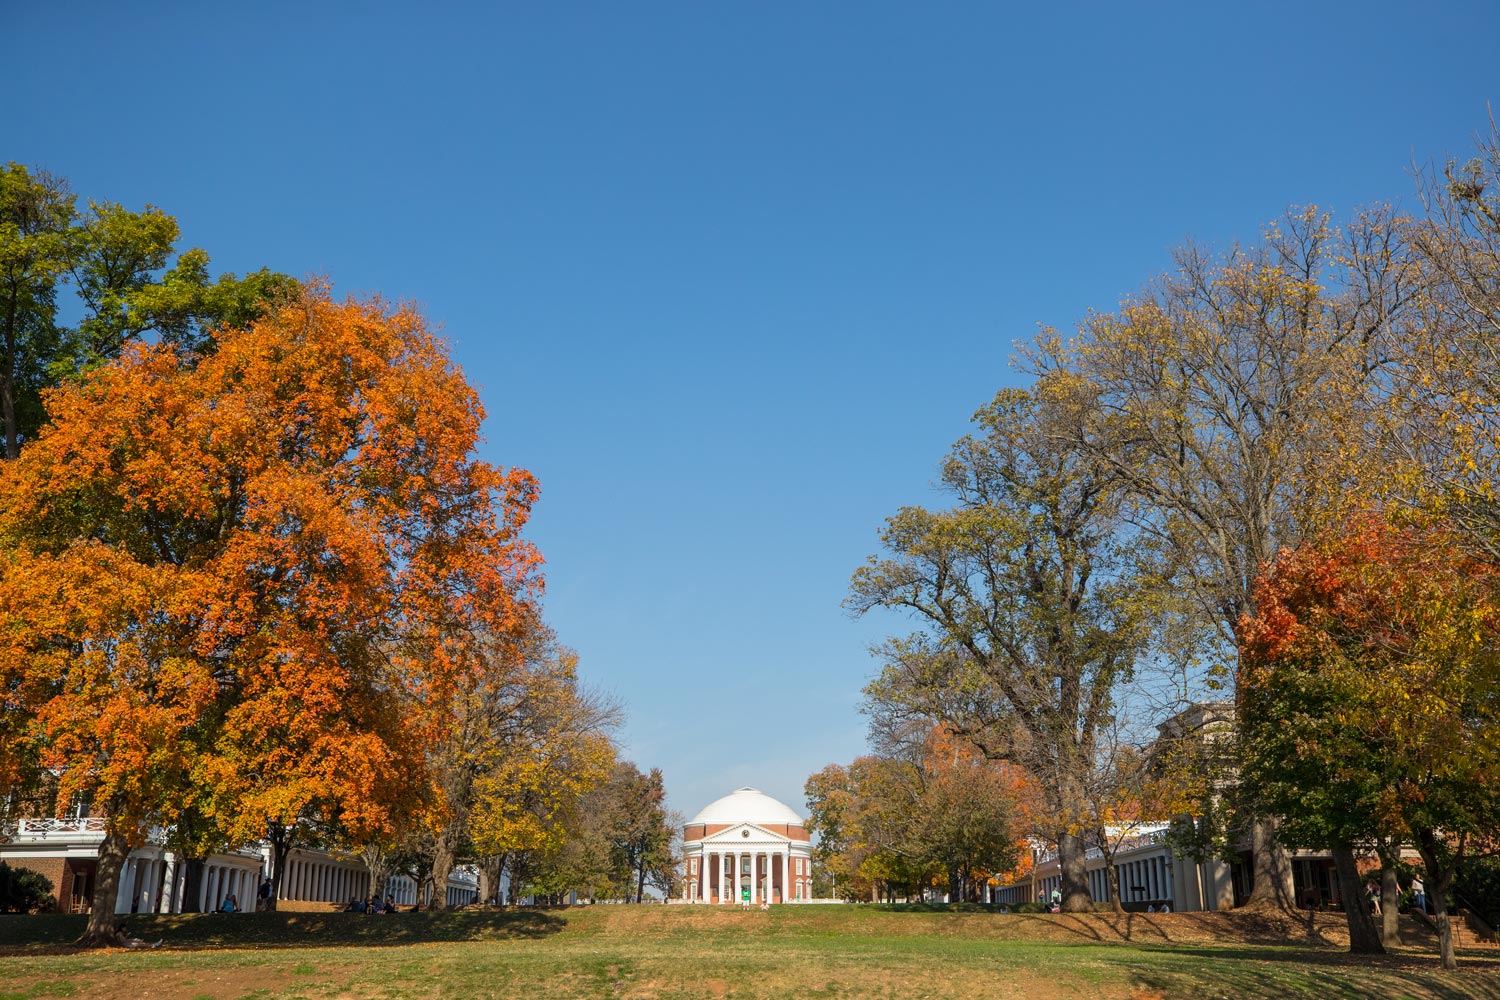 Rotunda from the Lawn in the fall as the leaves are changing colors and falling on to the ground